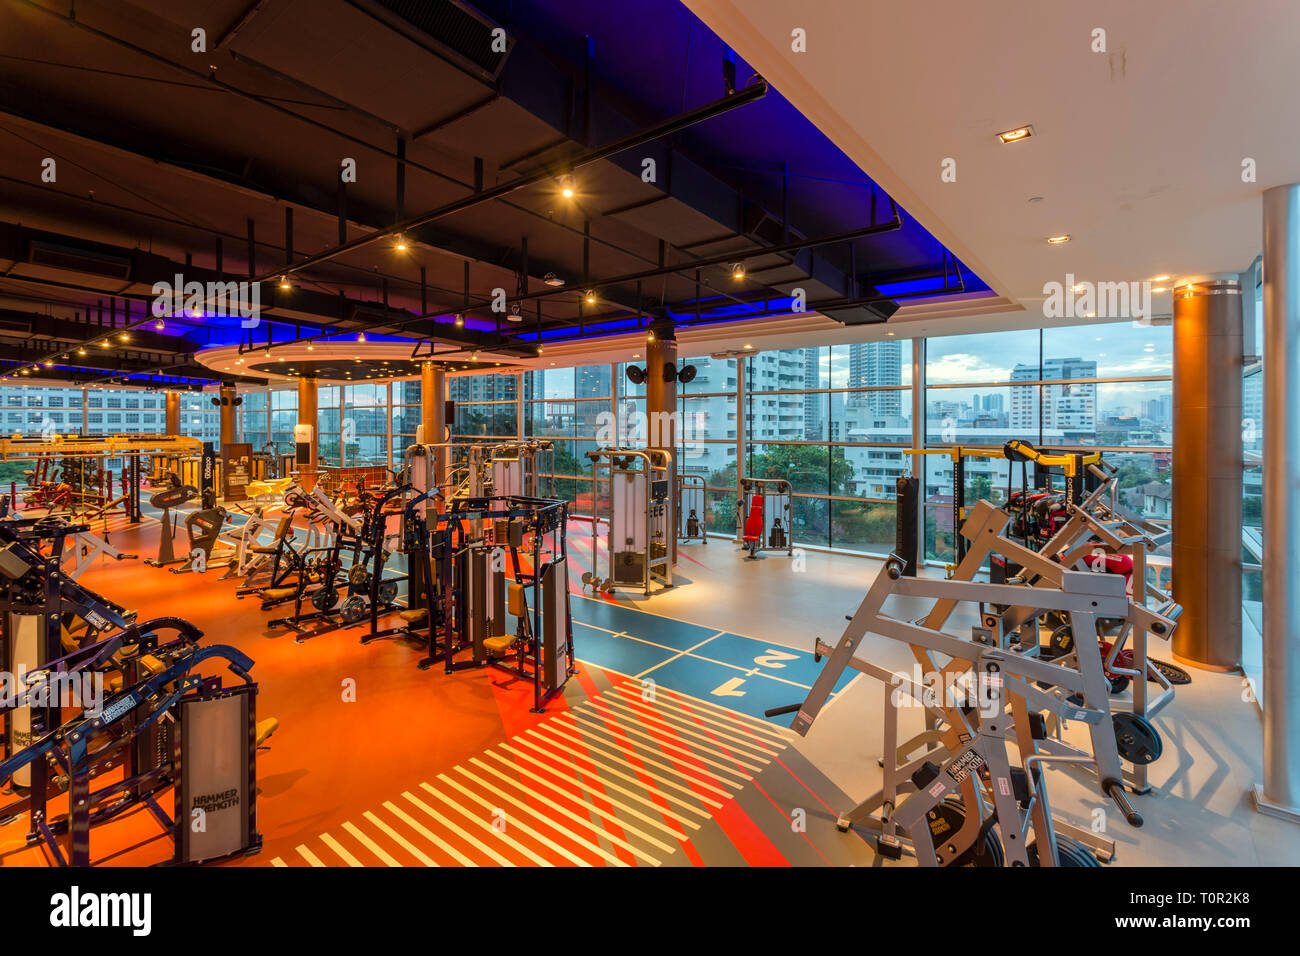 tower Broom efficacy Interior of Cascade Club and Spa health club fitness centre located in  Bangkok, Thailand Stock Photo - Alamy